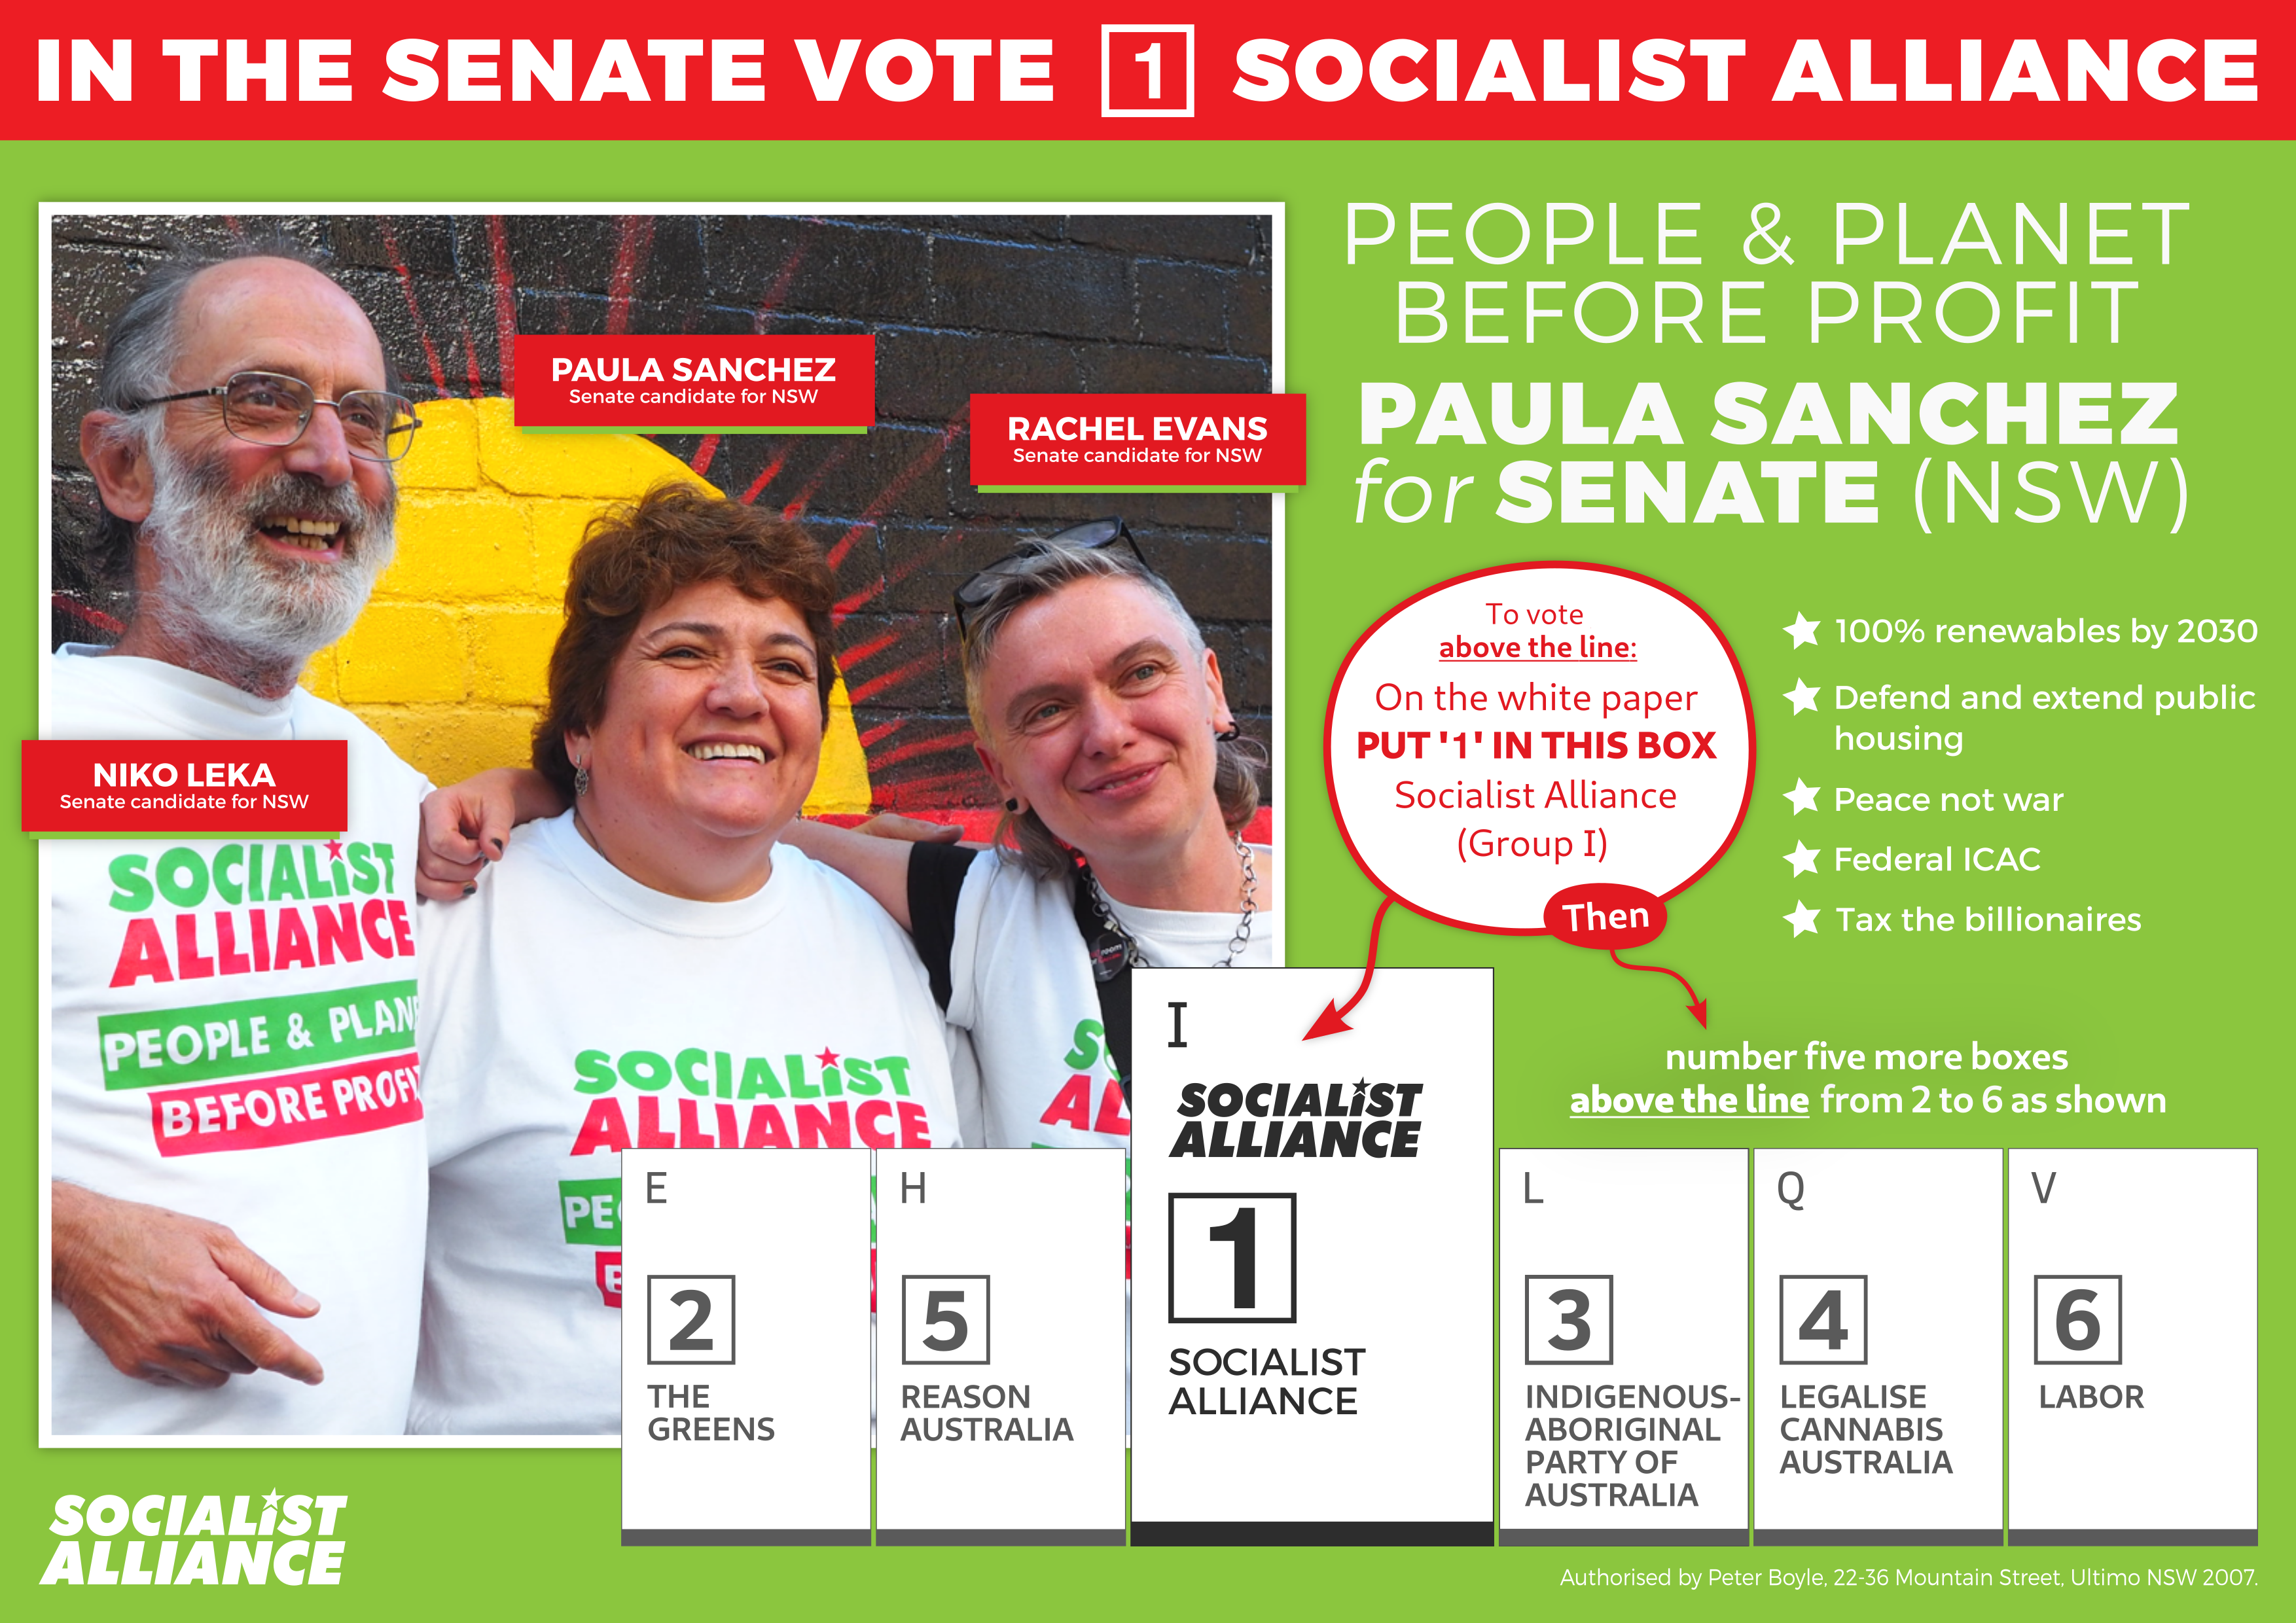 How to vote Socialist Alliance in the Senate New South Wales 2022